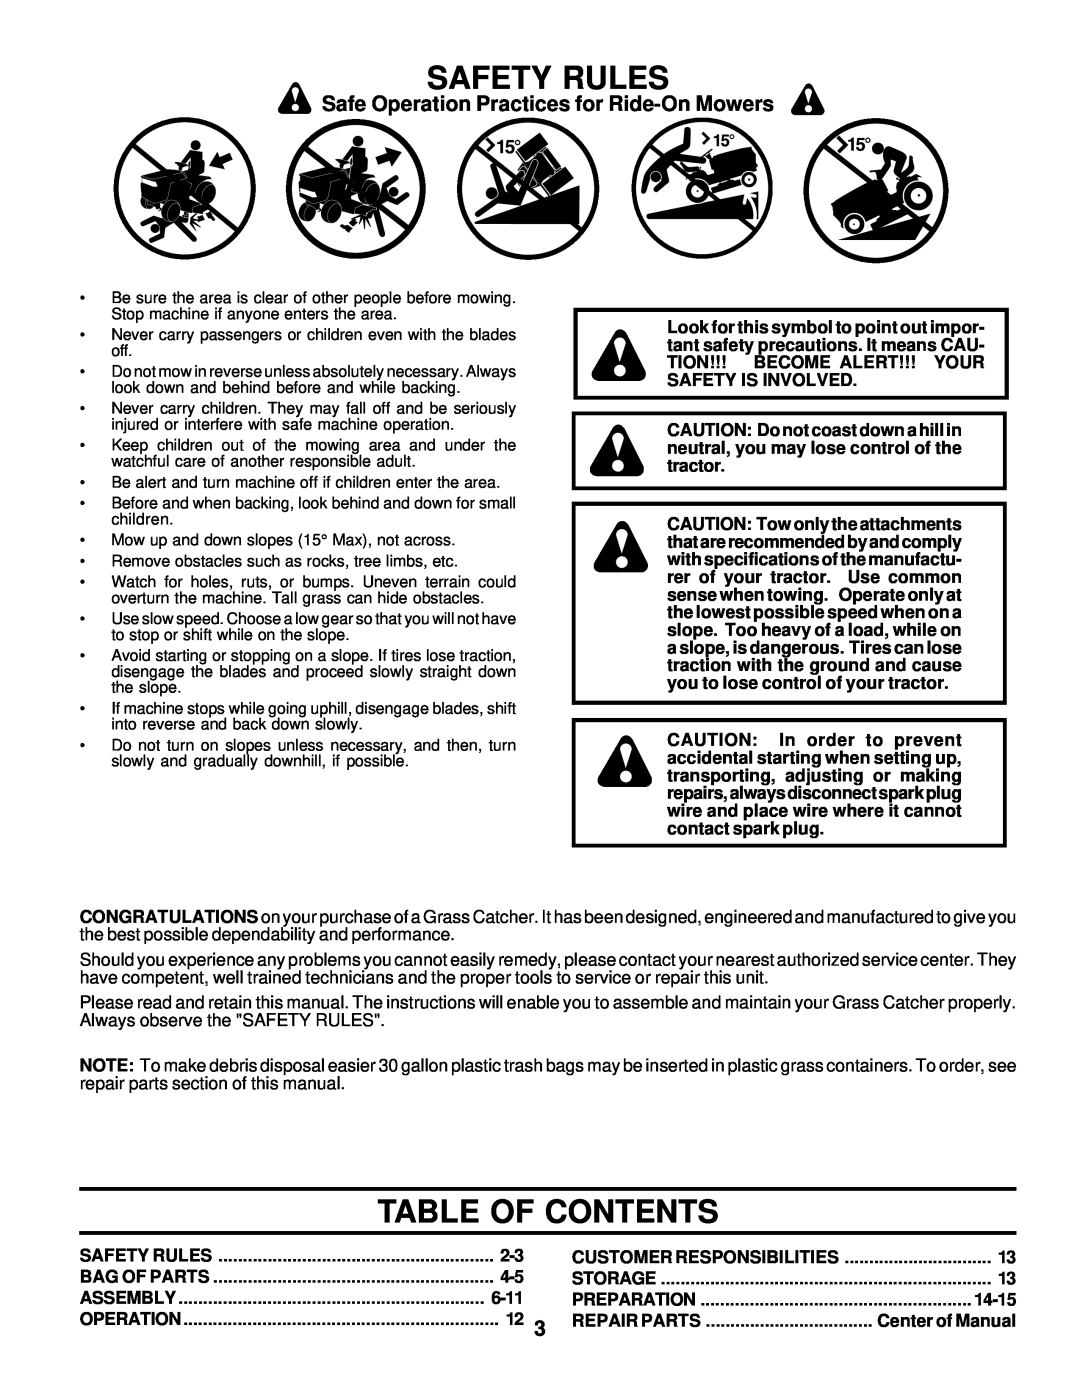 Husqvarna C342B Table Of Contents, Safety Rules, Safe Operation Practices for Ride-On Mowers, Customer Responsibilities 